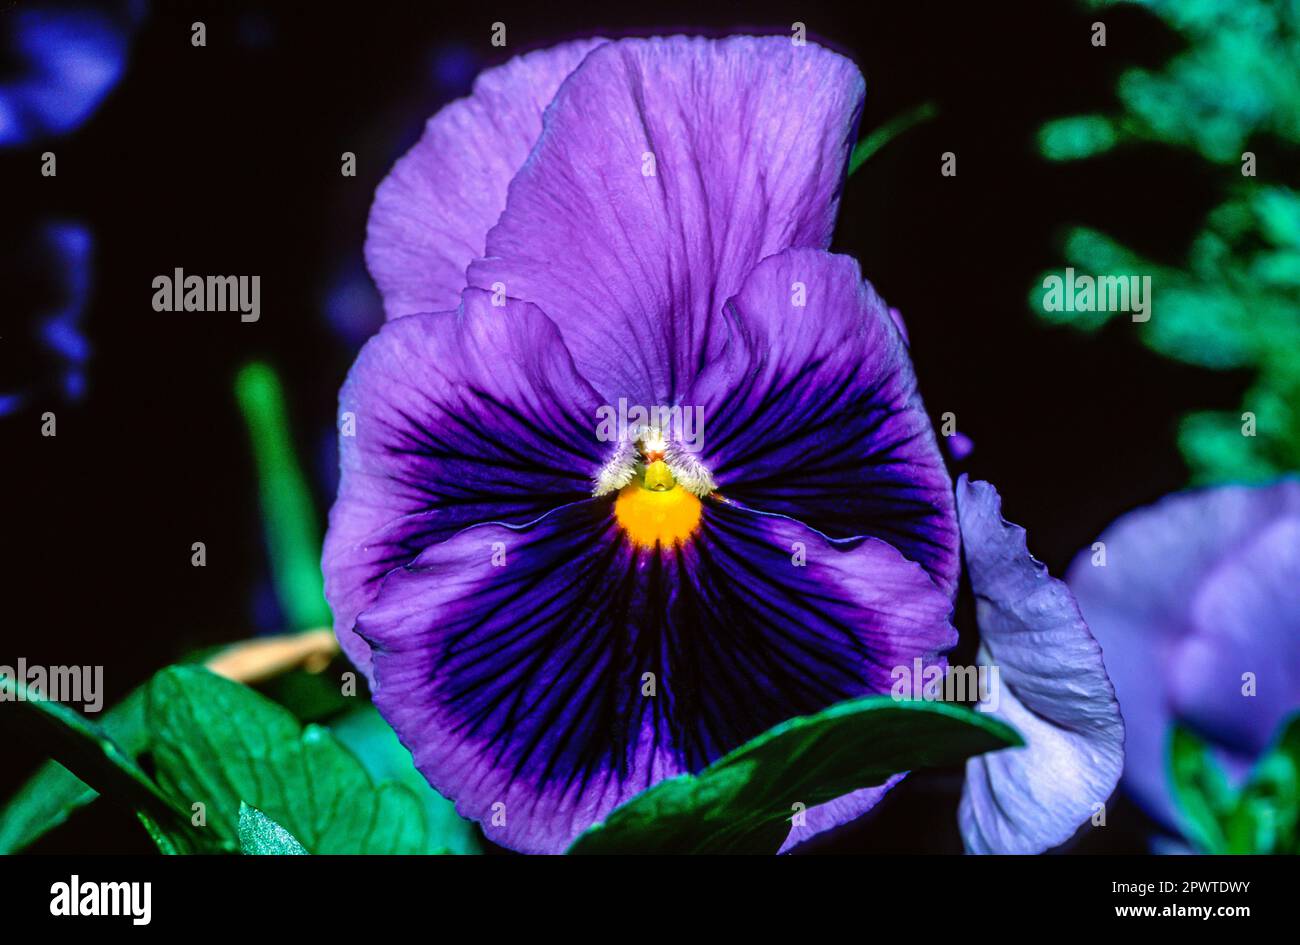 Close-up of the flower of a blue and purple flowering violet Stock Photo